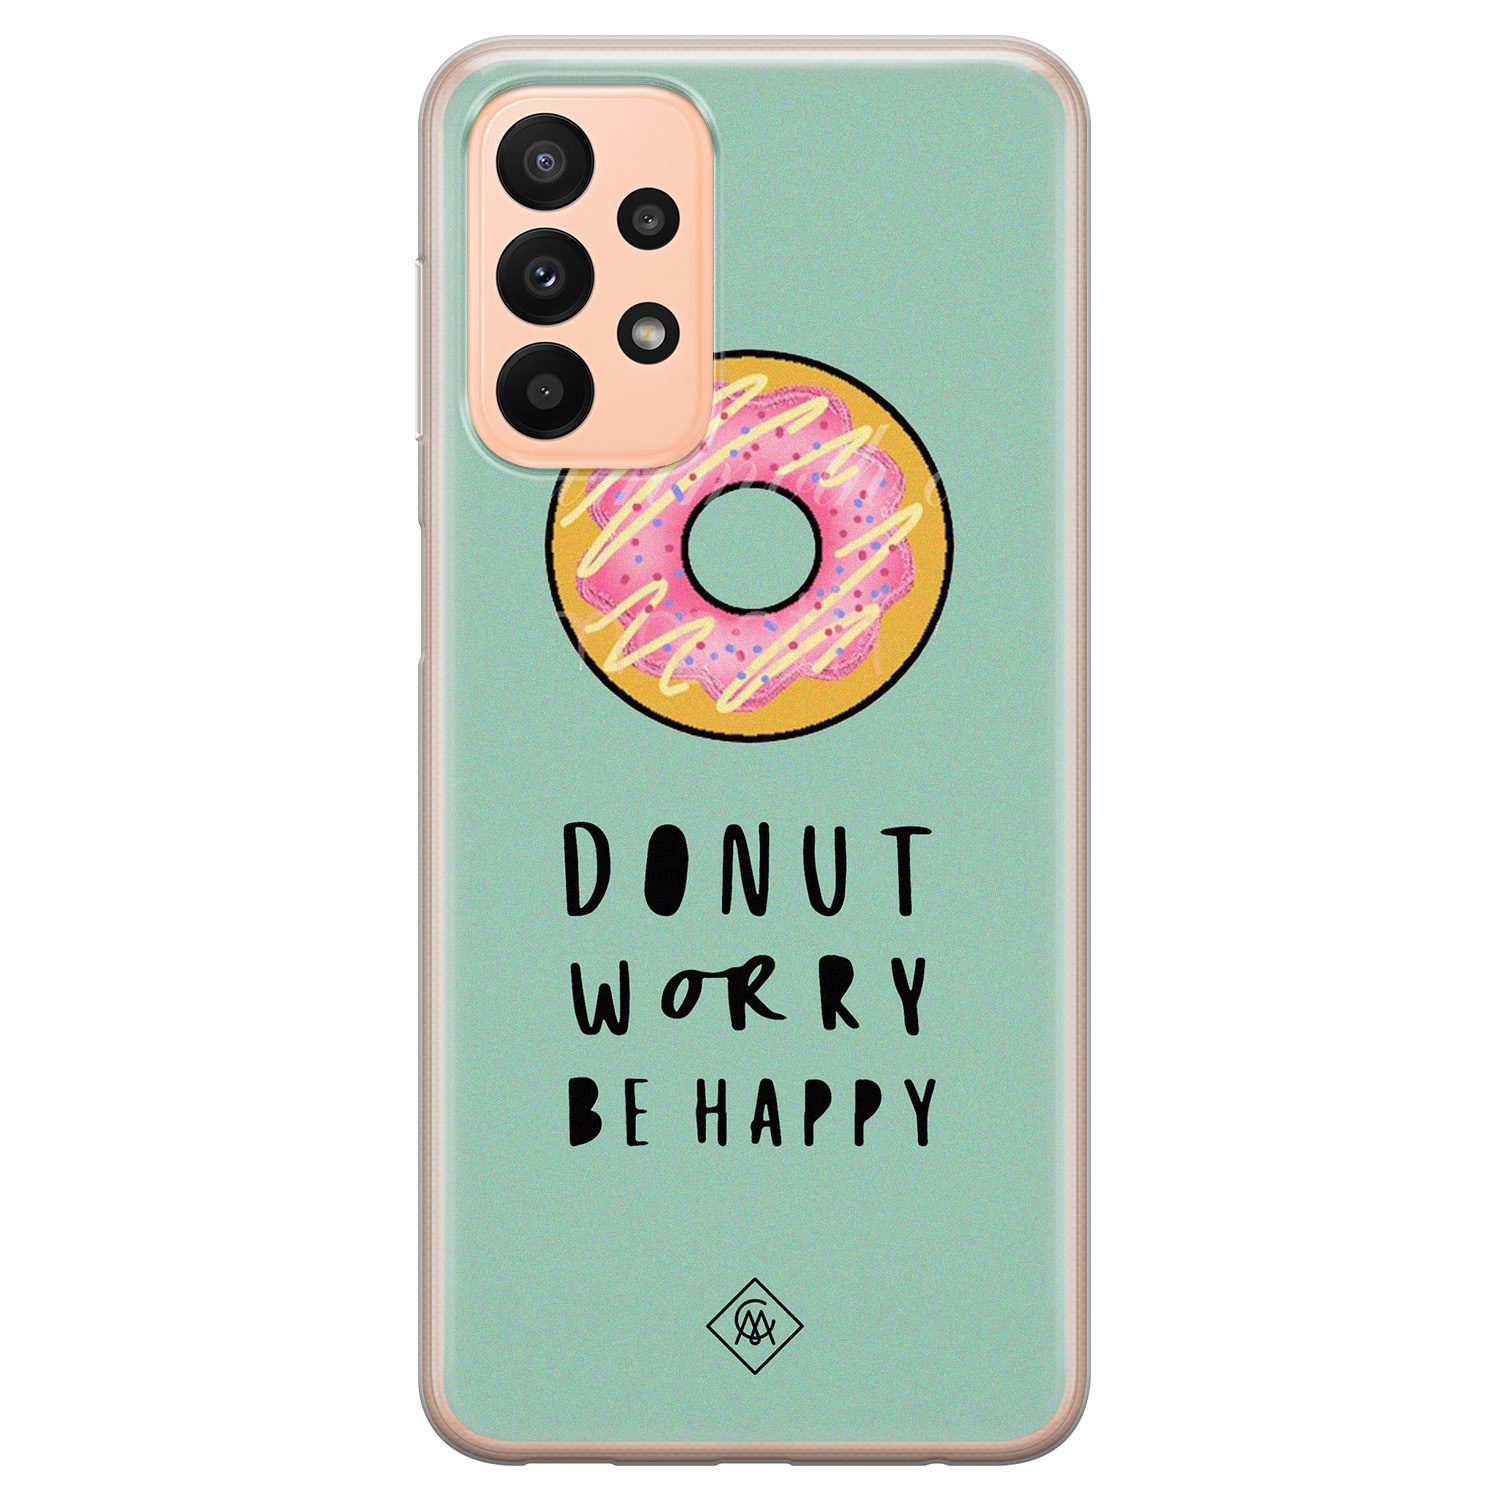 Samsung A23 hoesje siliconen - Donut worry | Samsung Galaxy A23 case | mint | TPU backcover transparant